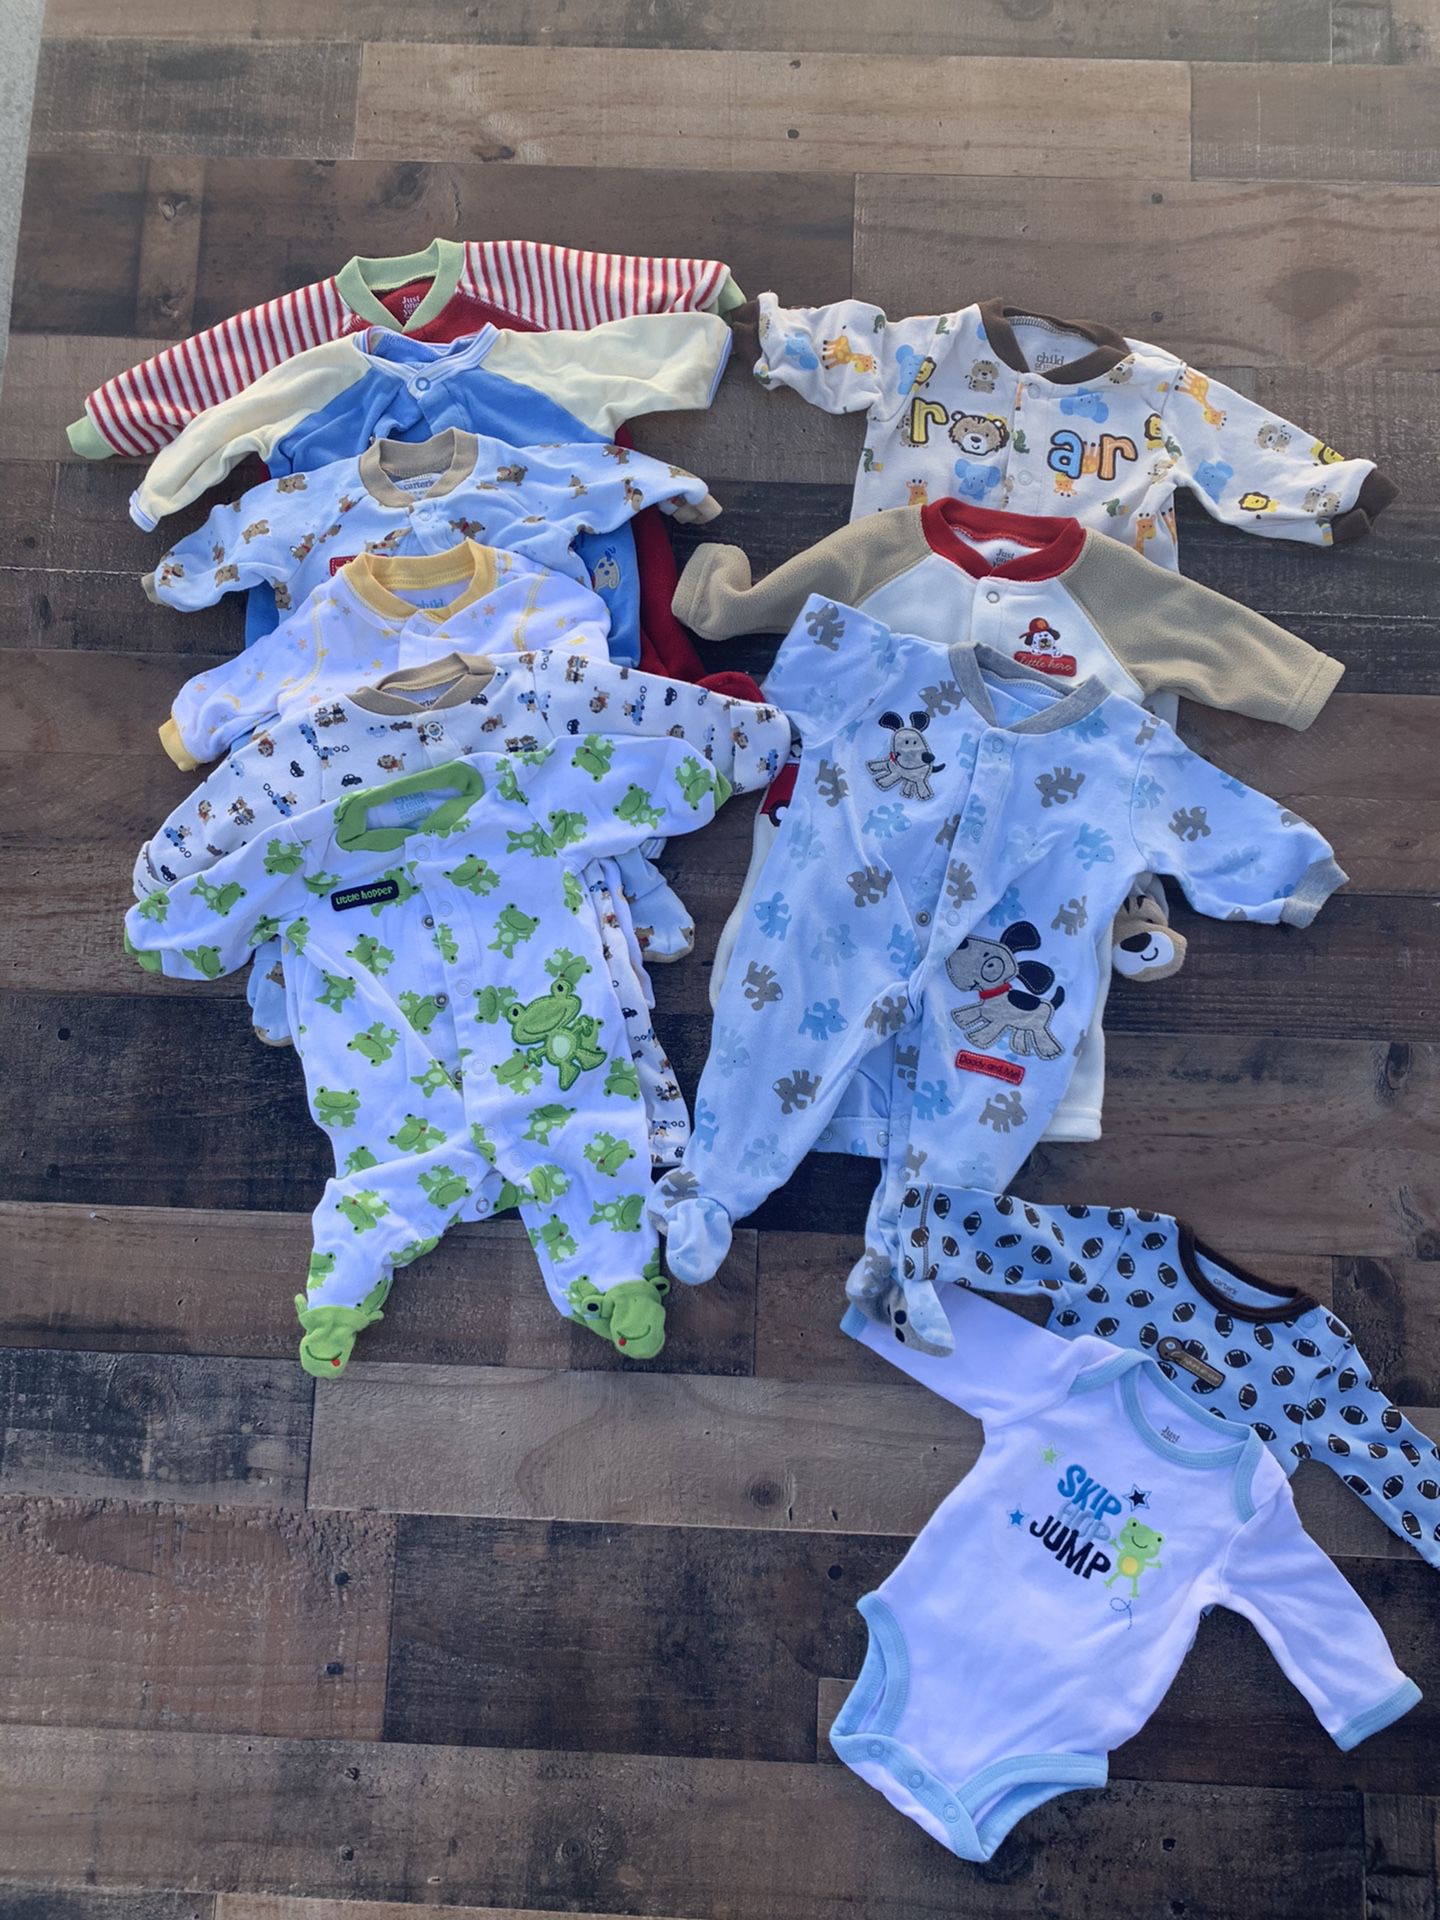 FREE Delivery! Lot of 11 Newborn - 3 months Carters Boys sleepers